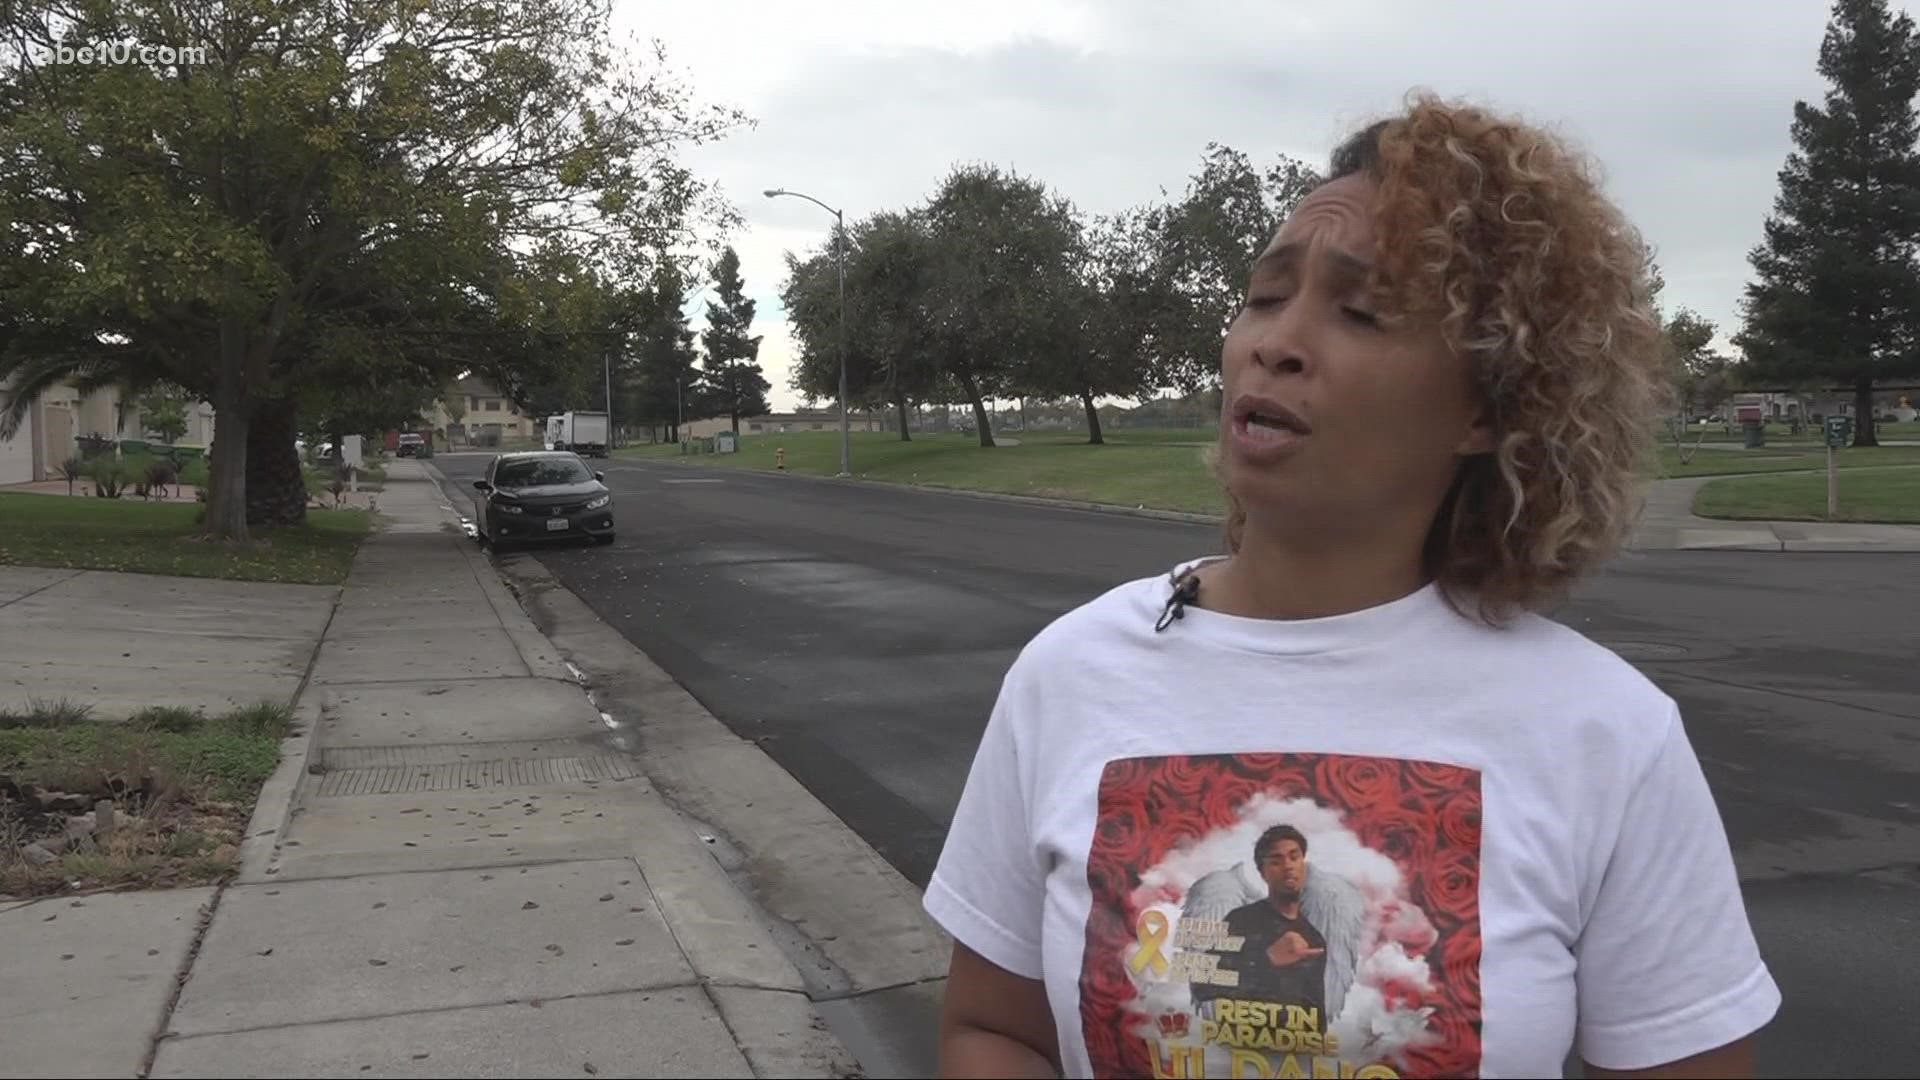 A grieving Stockton mother is looking for answers about why her son was gunned down this summer.